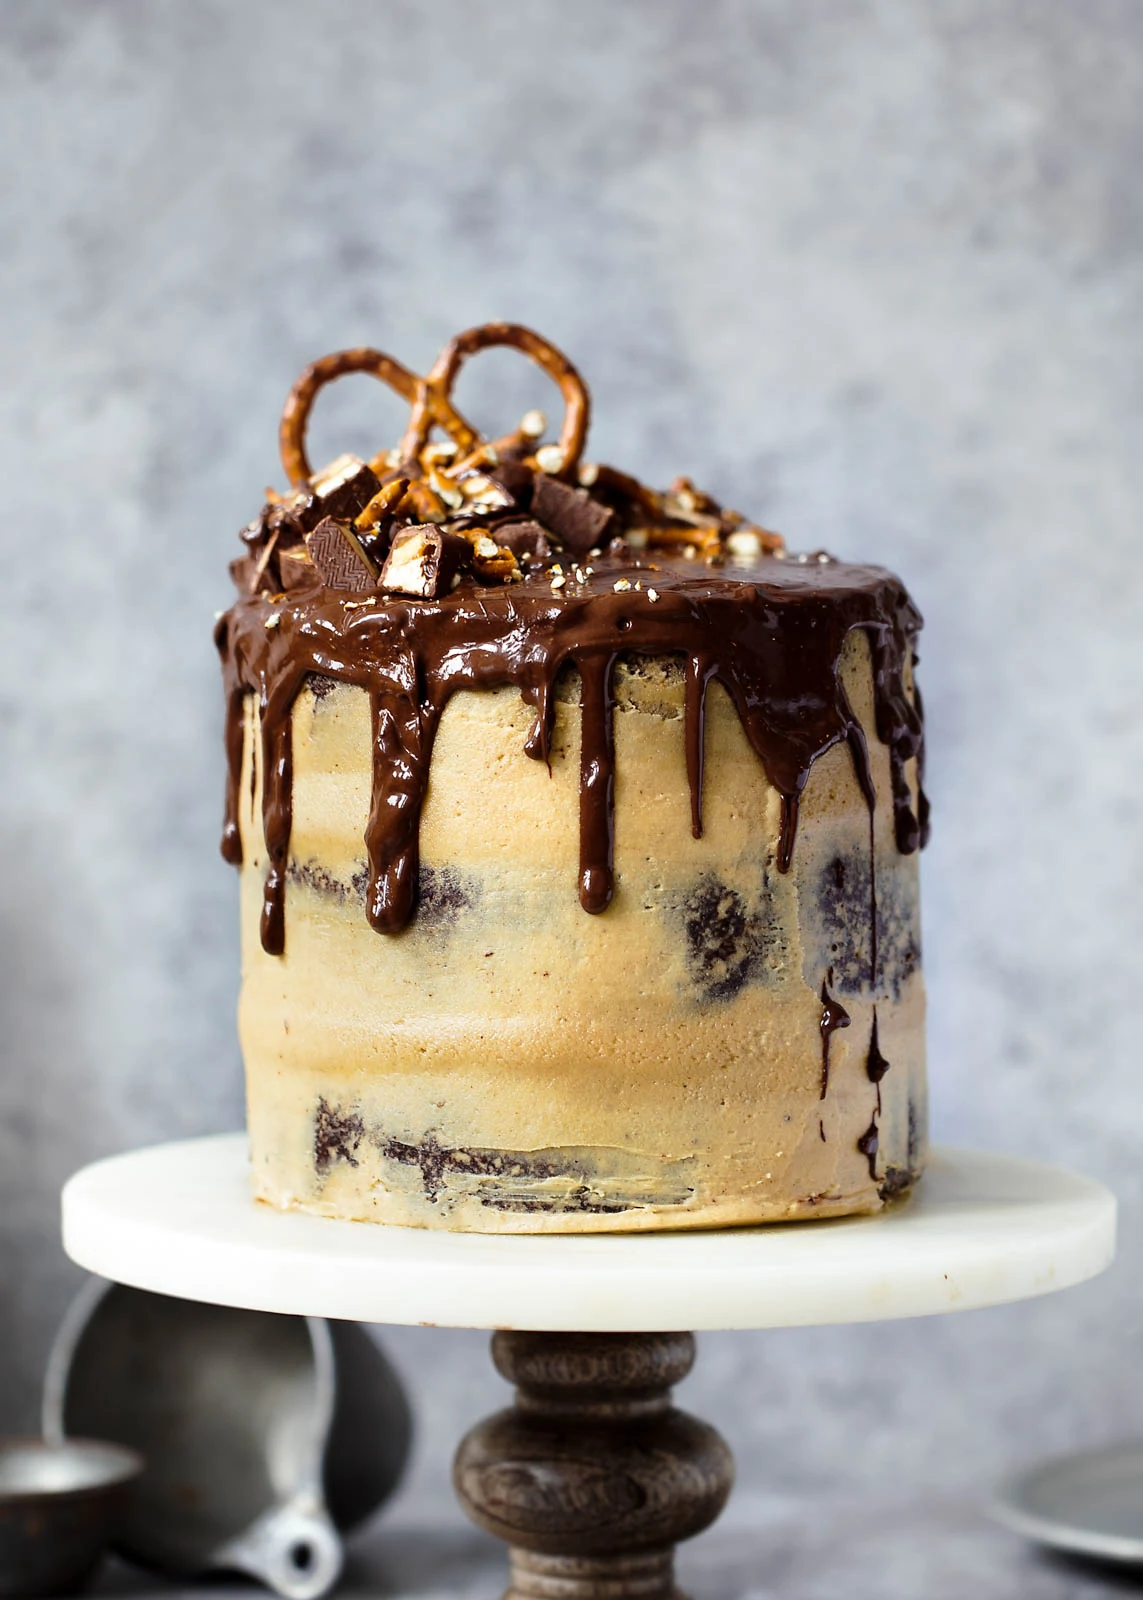 Peanut Butter Chocolate Stout Cake on cake stand